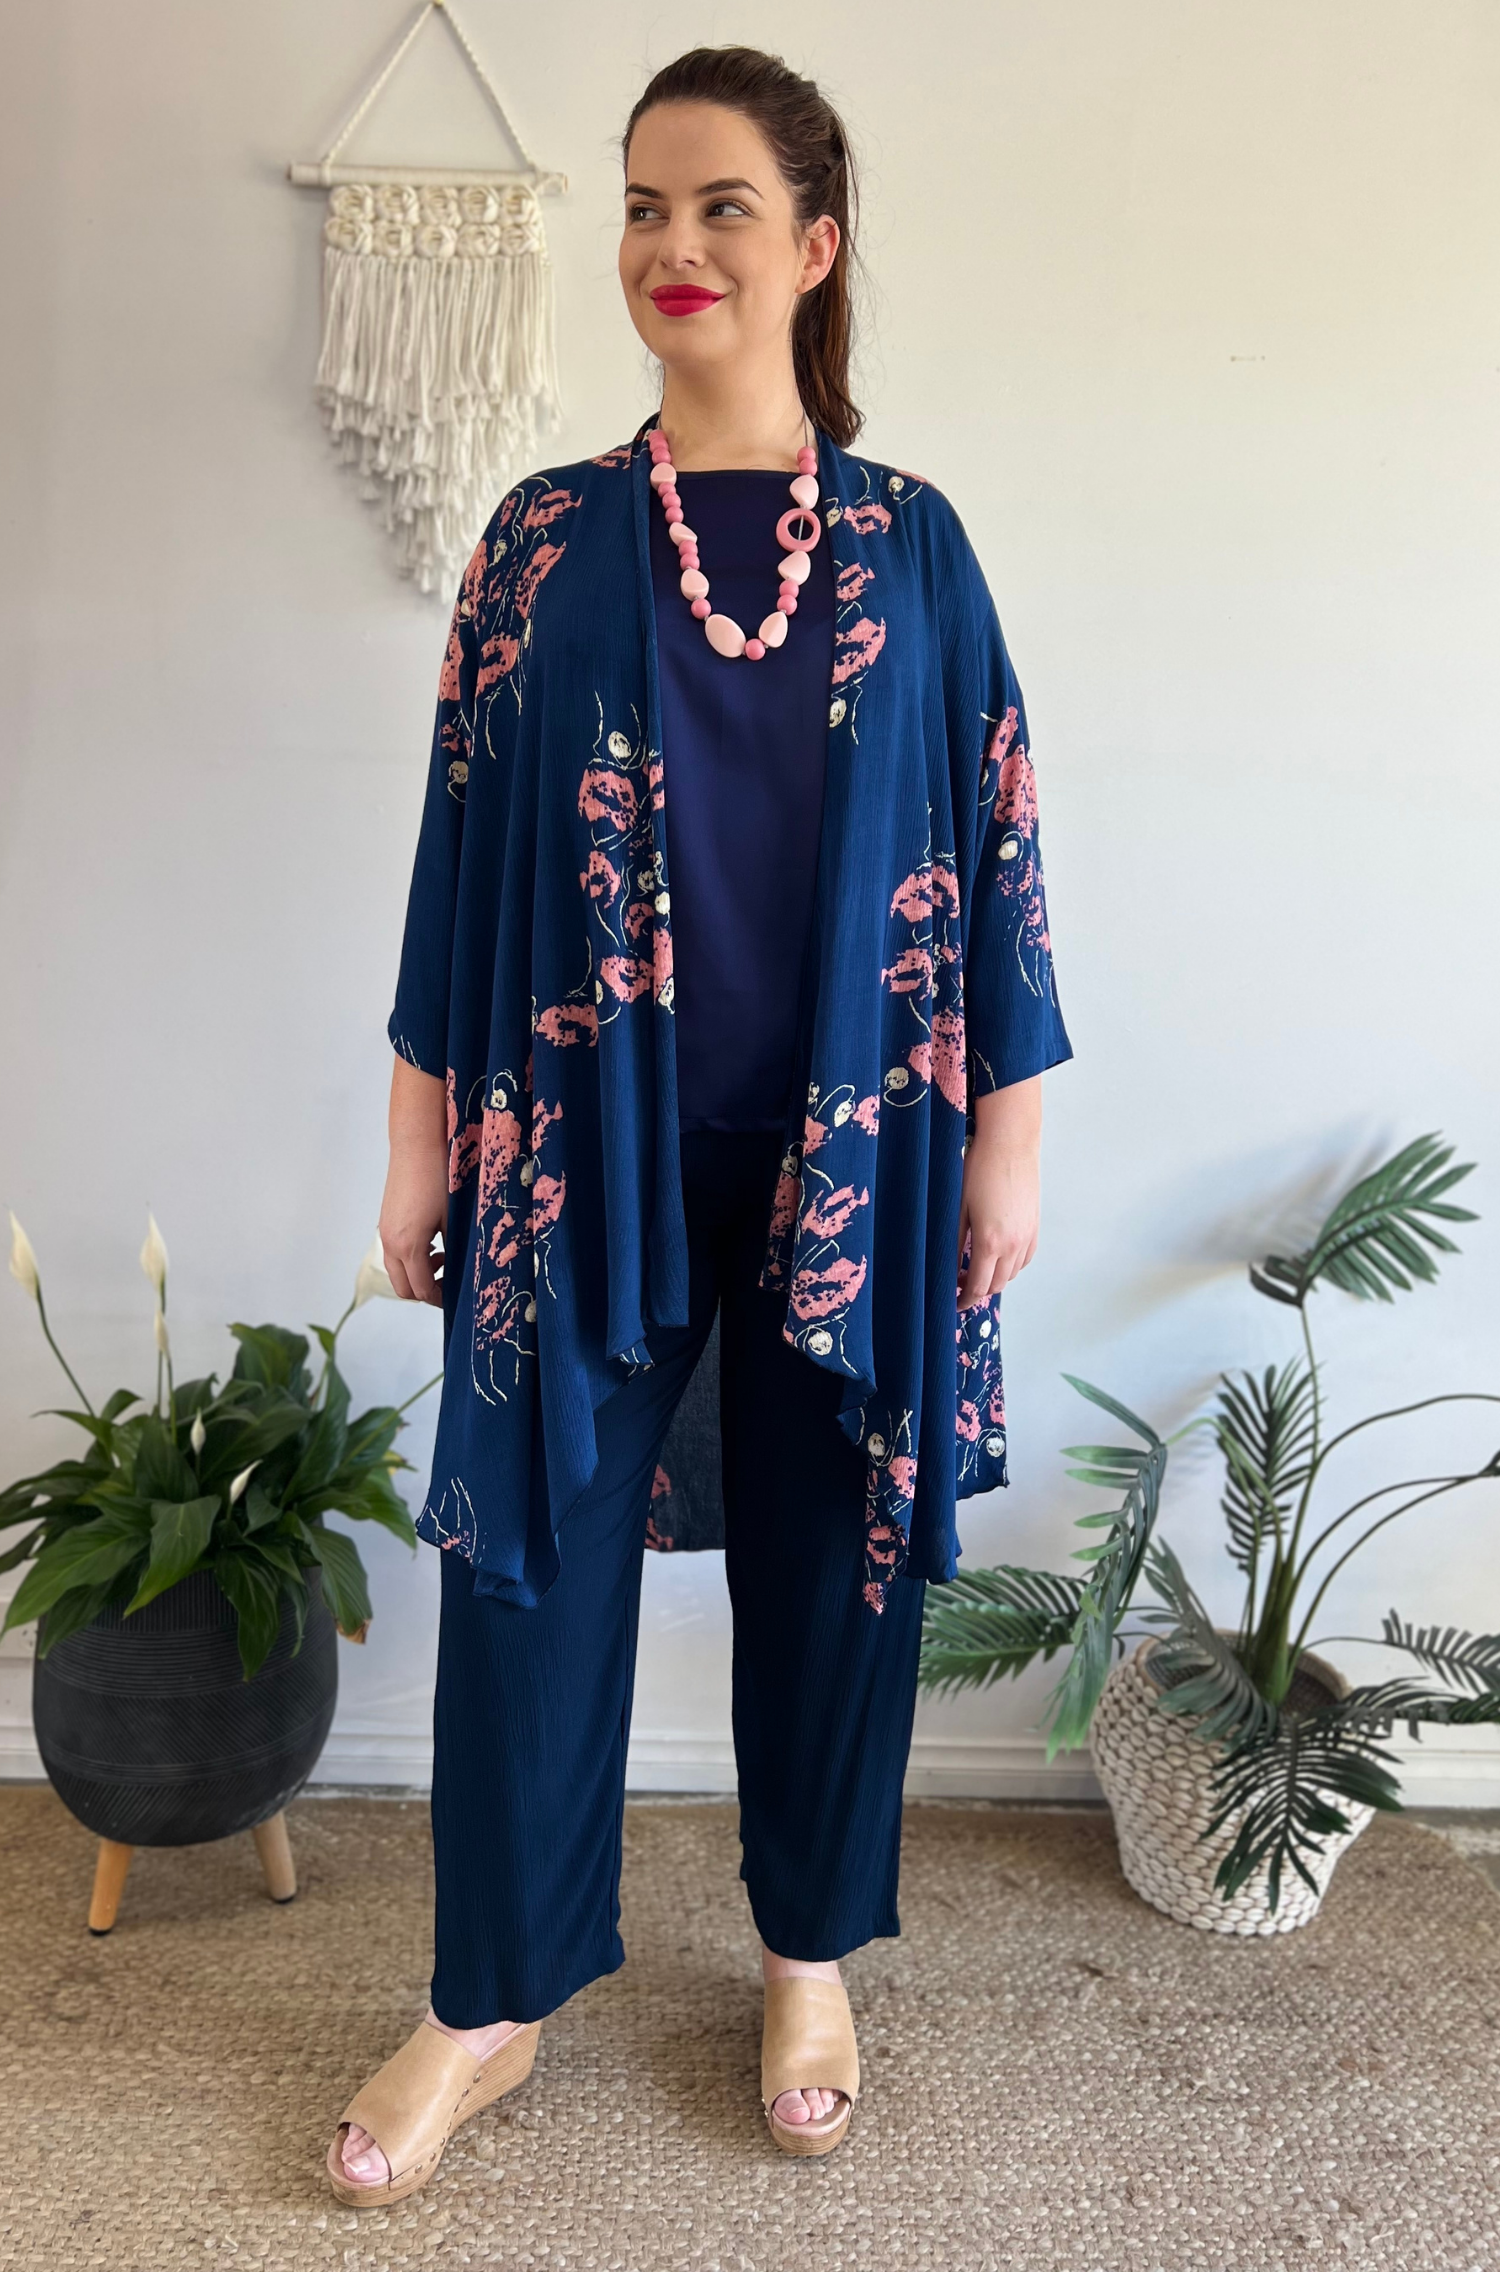 Kita Ku modelling the navy pant kita along with a navy and floral jacket in a retail setting. 